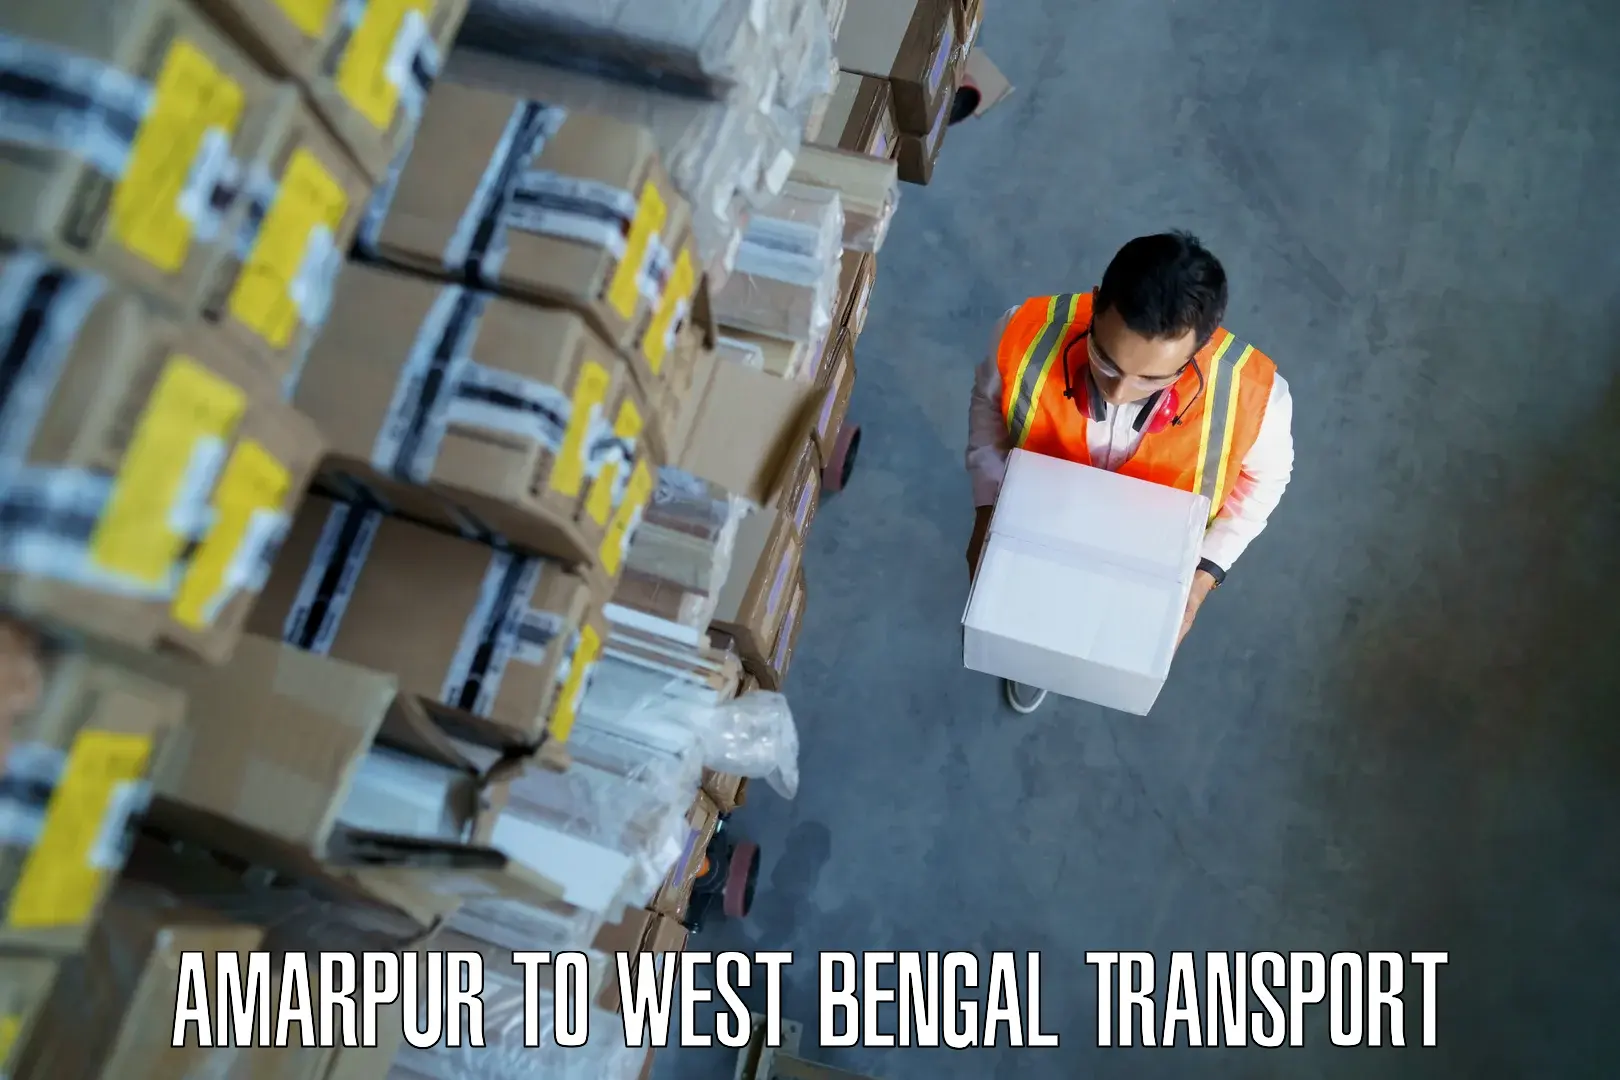 Pick up transport service Amarpur to Hooghly